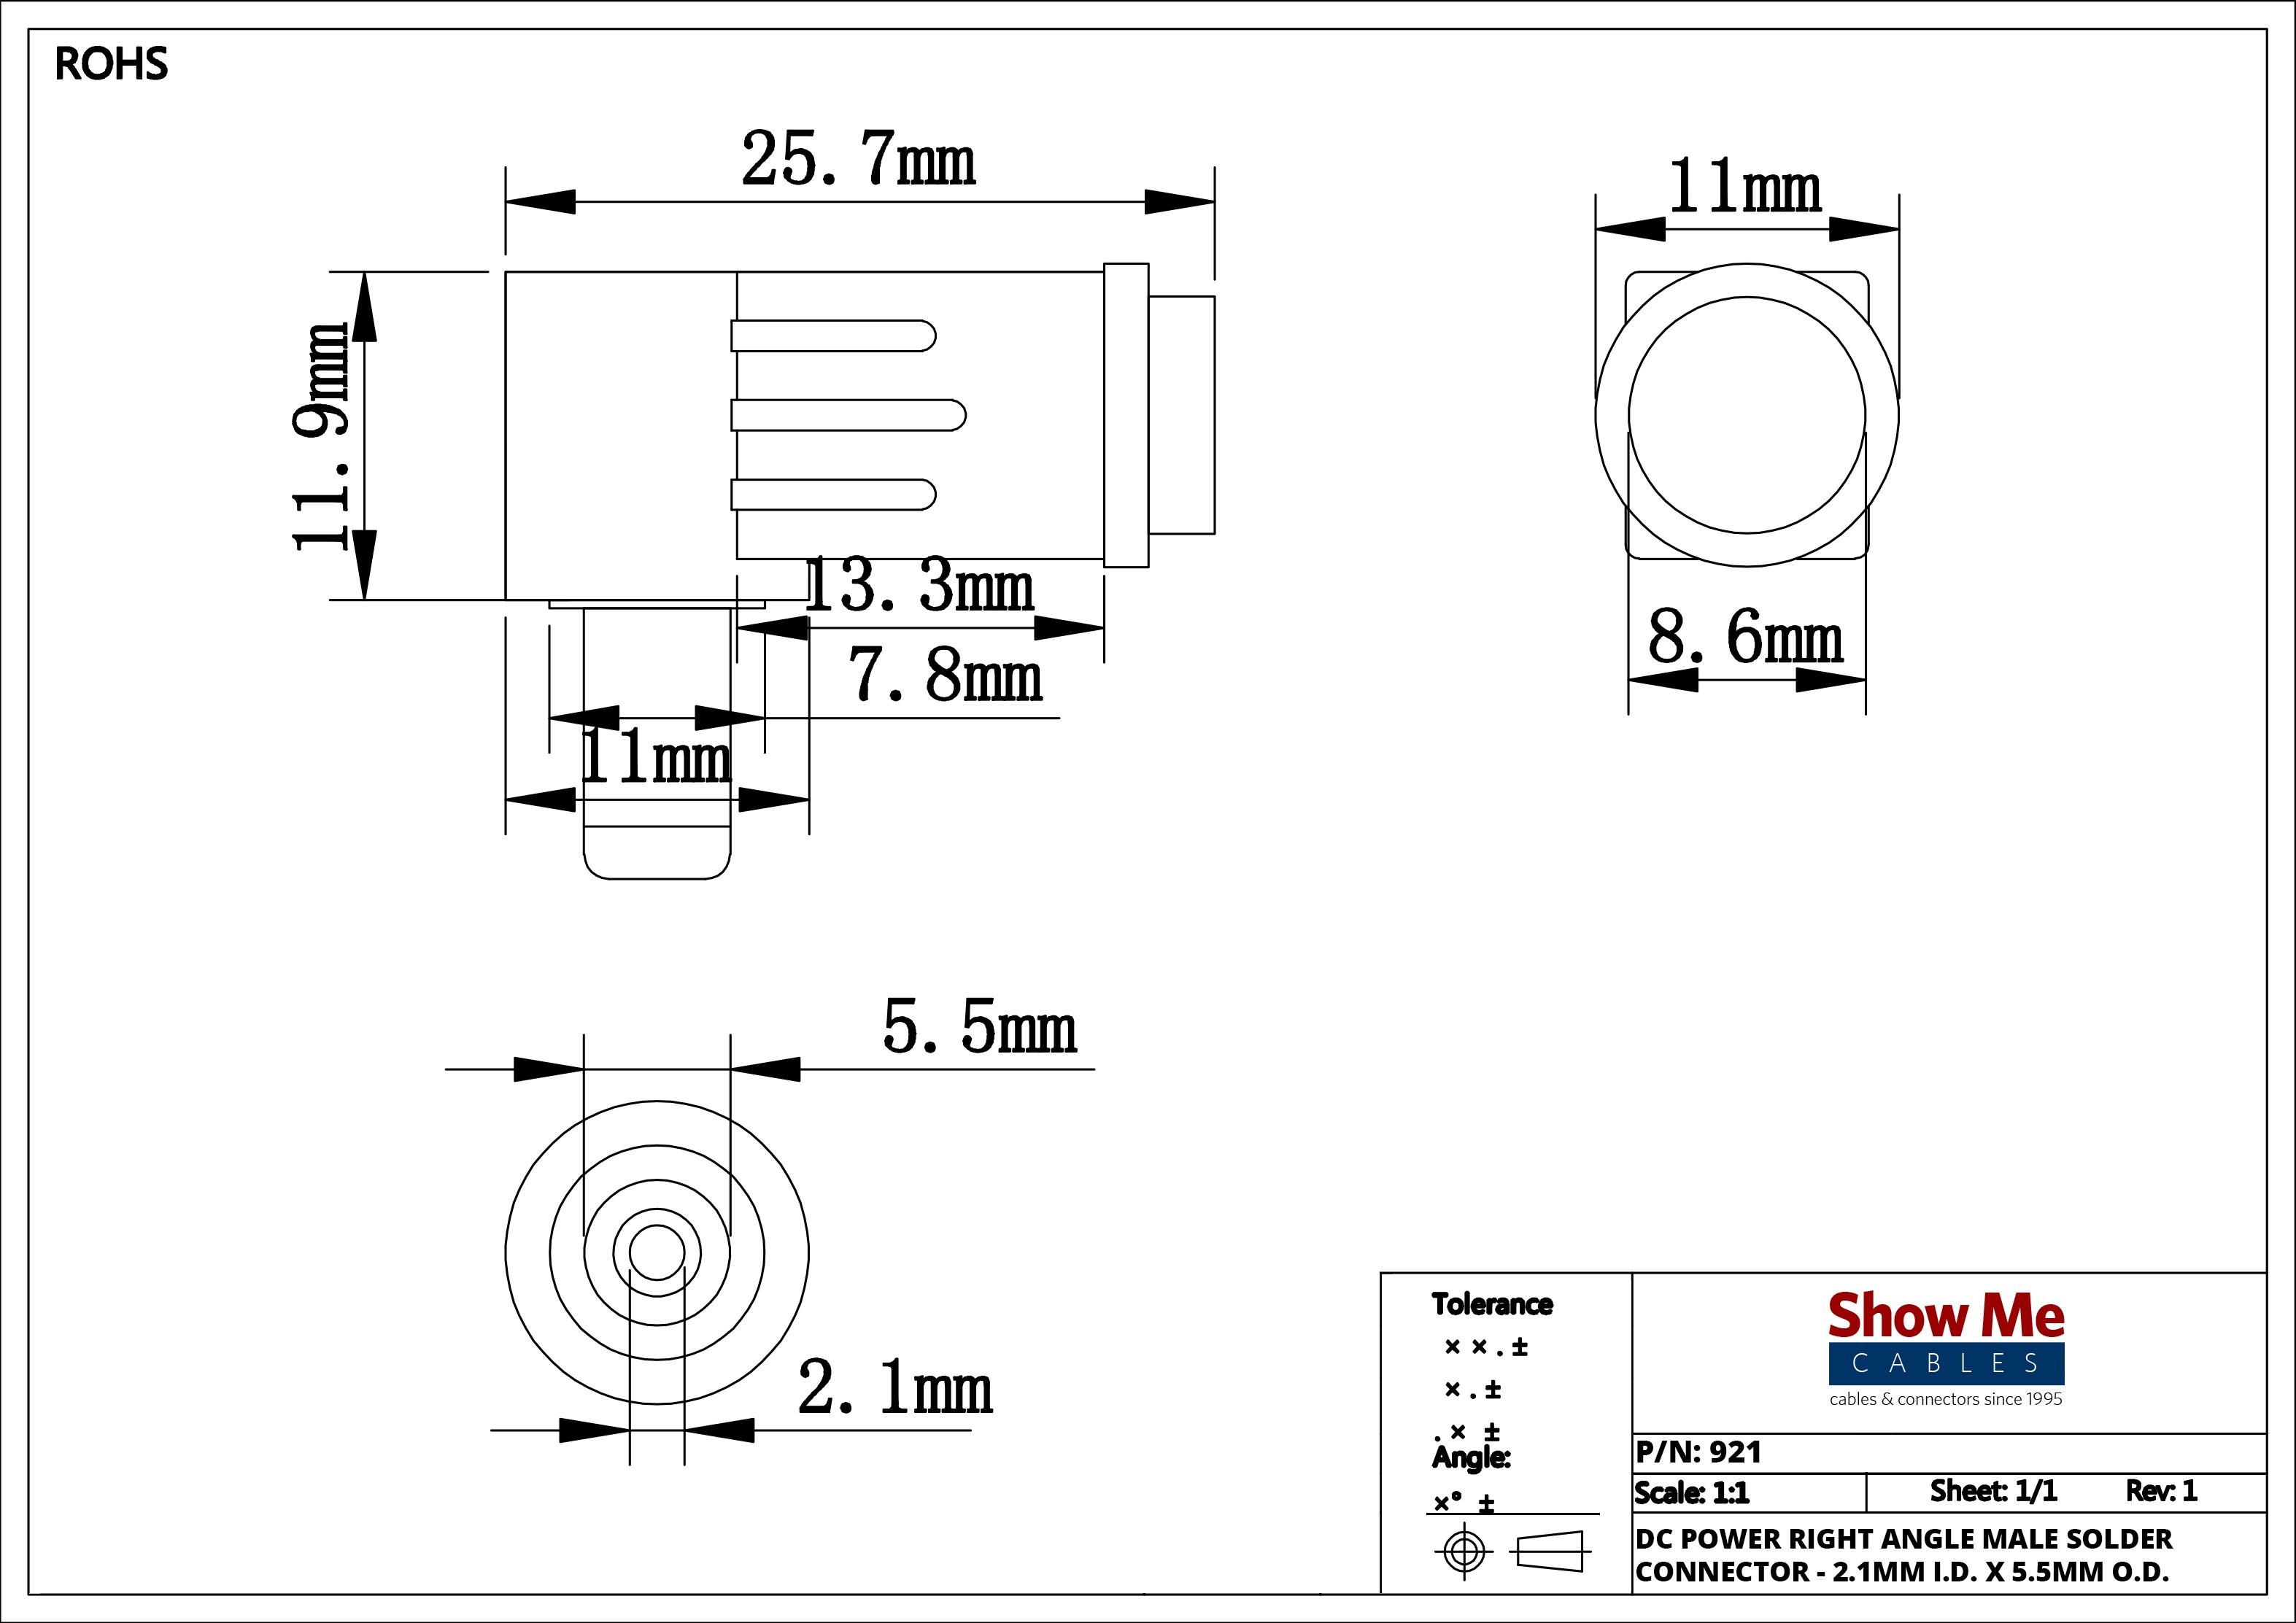 Relay In Wiring Diagram Best Electrical Circuit Diagram New 2 5mm Id 5 5mm Od Power